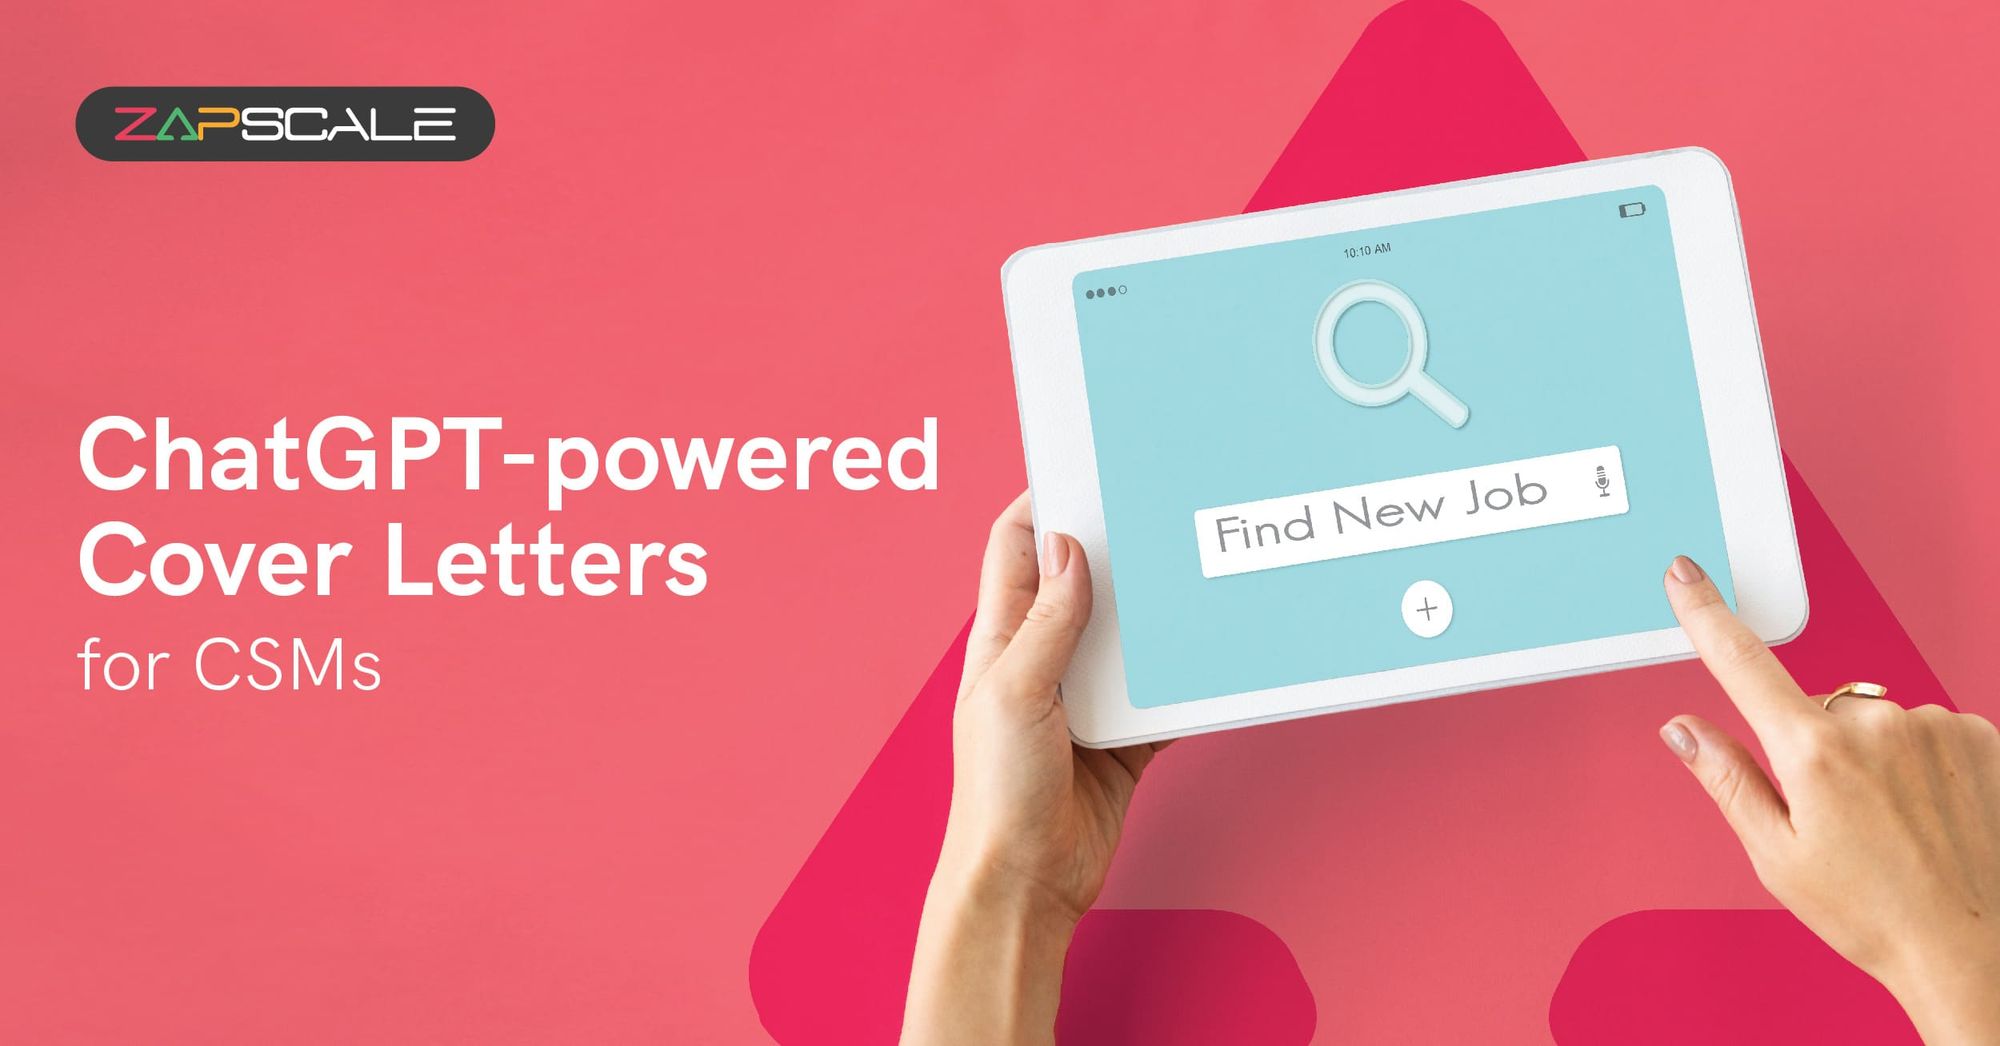 Elevate Your CSM Job Search with ChatGPT-powered Cover Letters